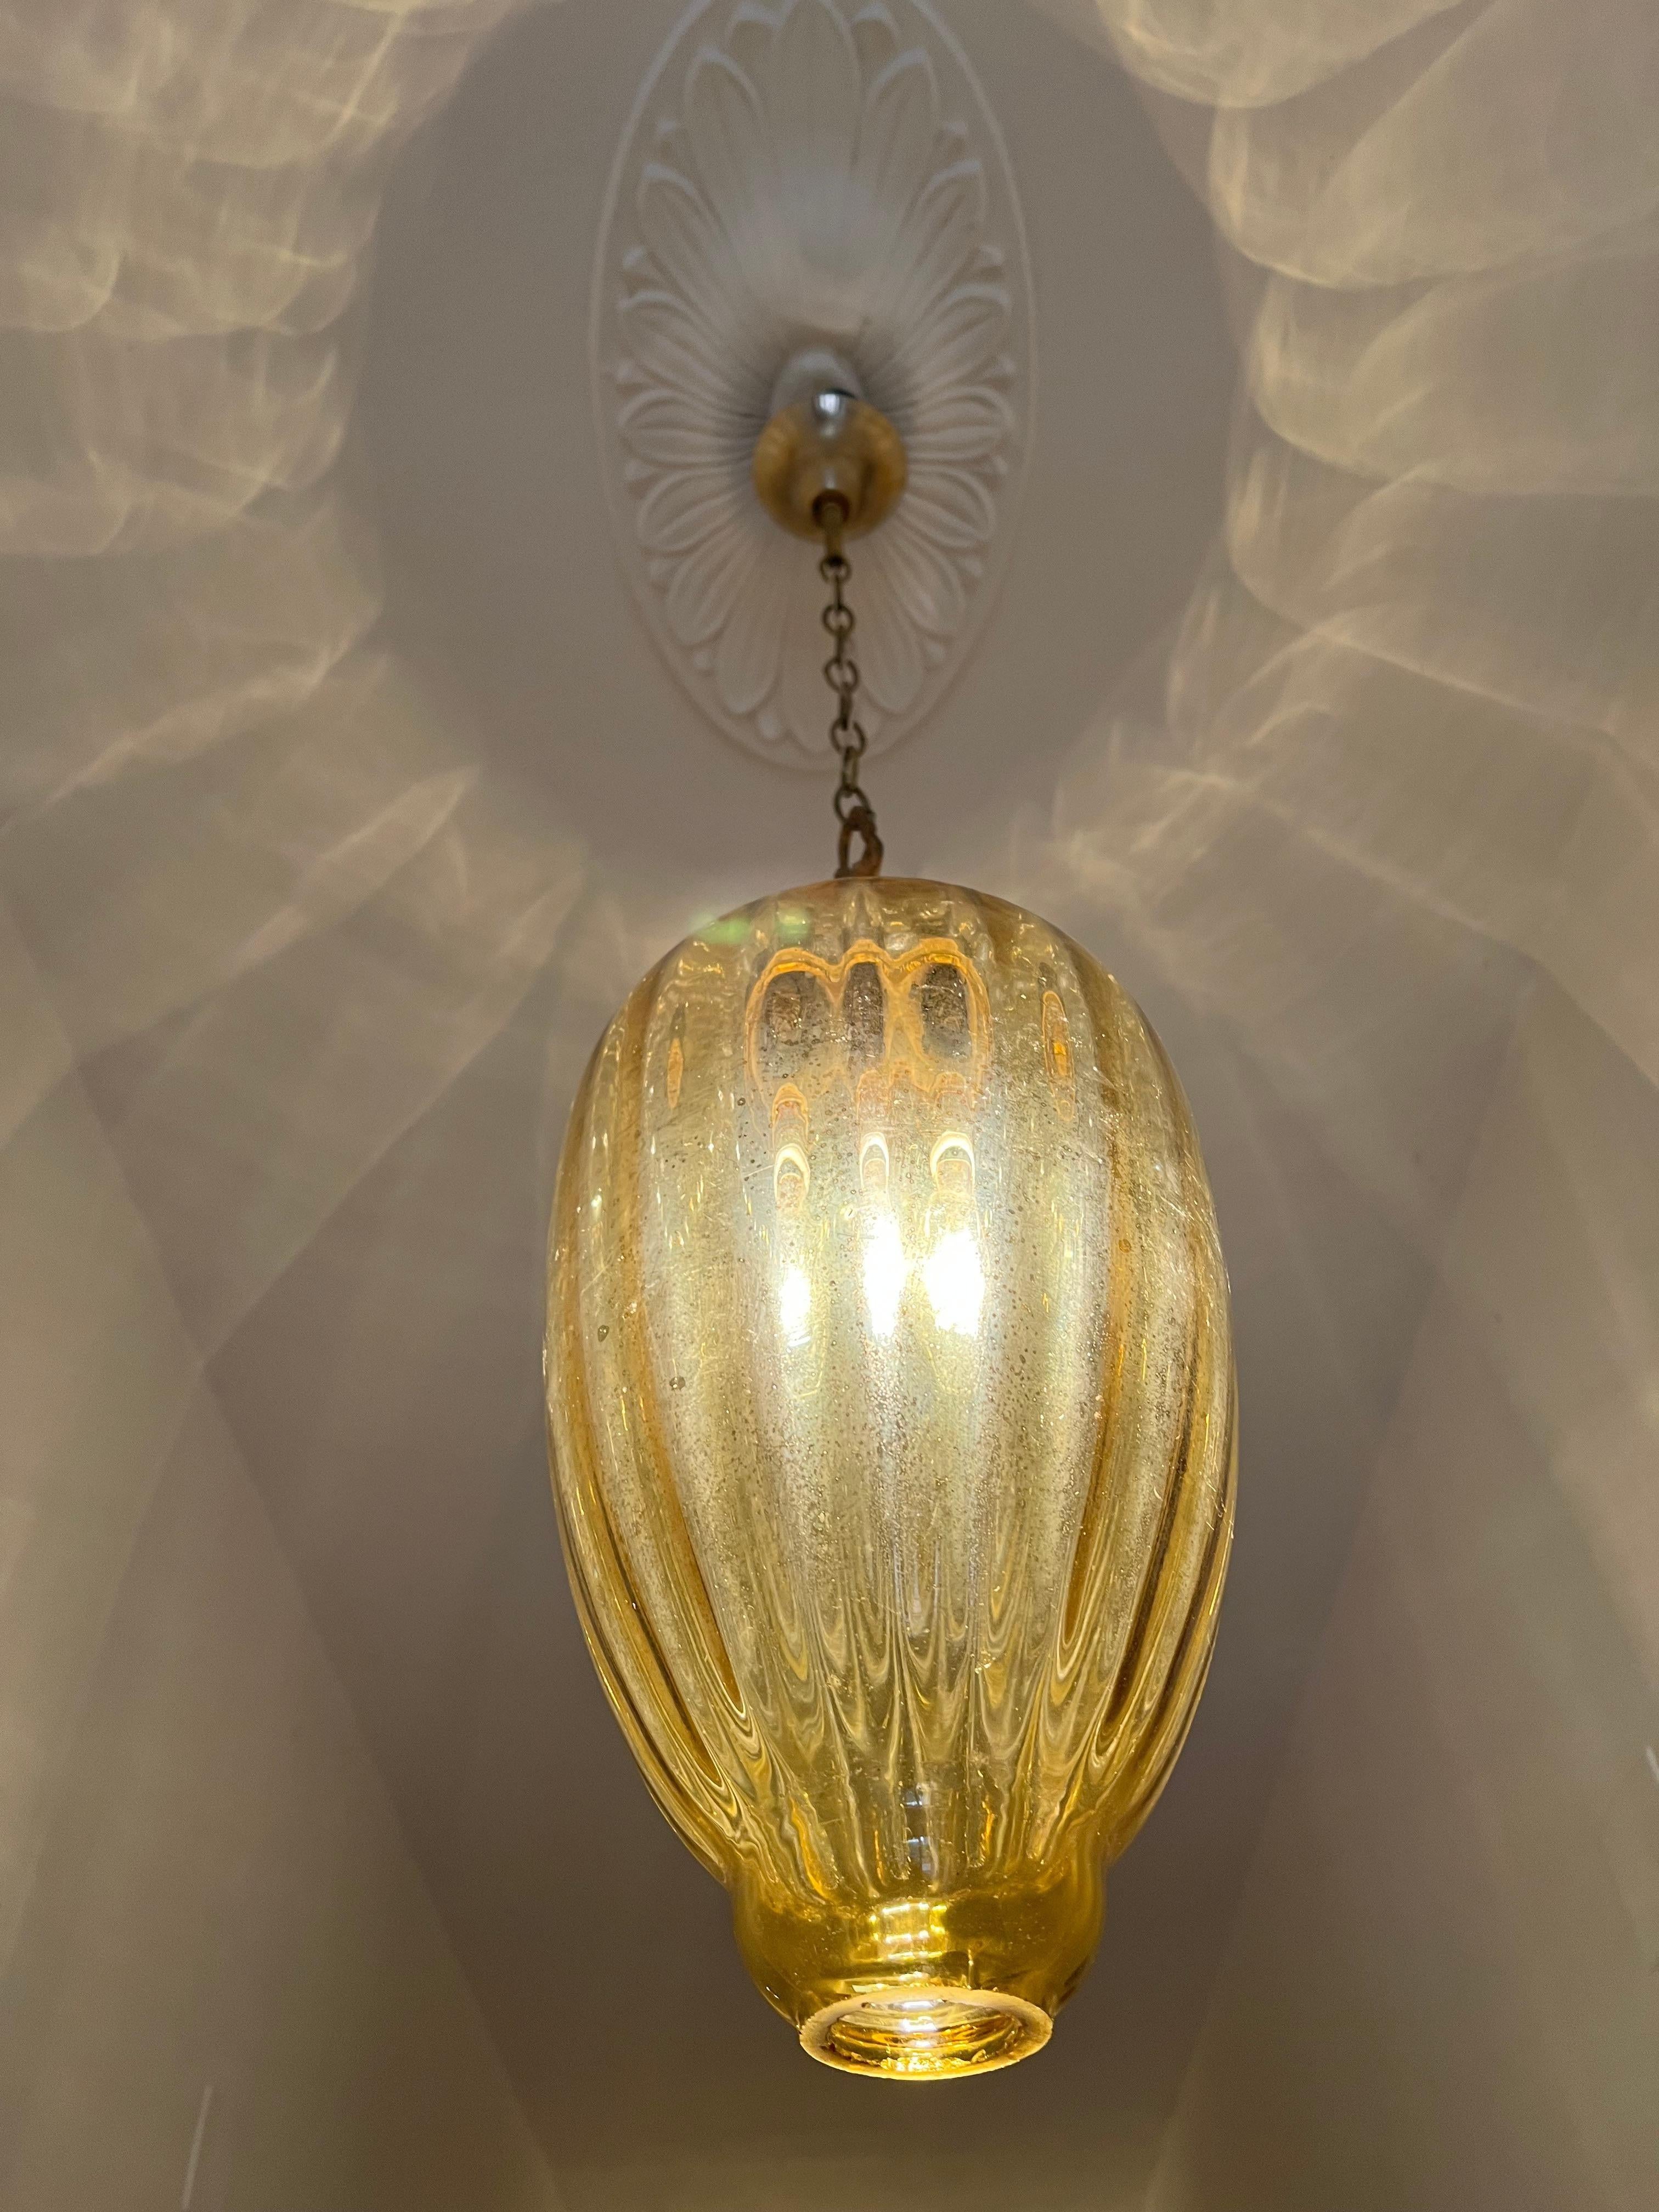 Gorgeous pair of amber-colored Mrrano glass lanterns. To give gorgeous light to even an anonymous hallway.